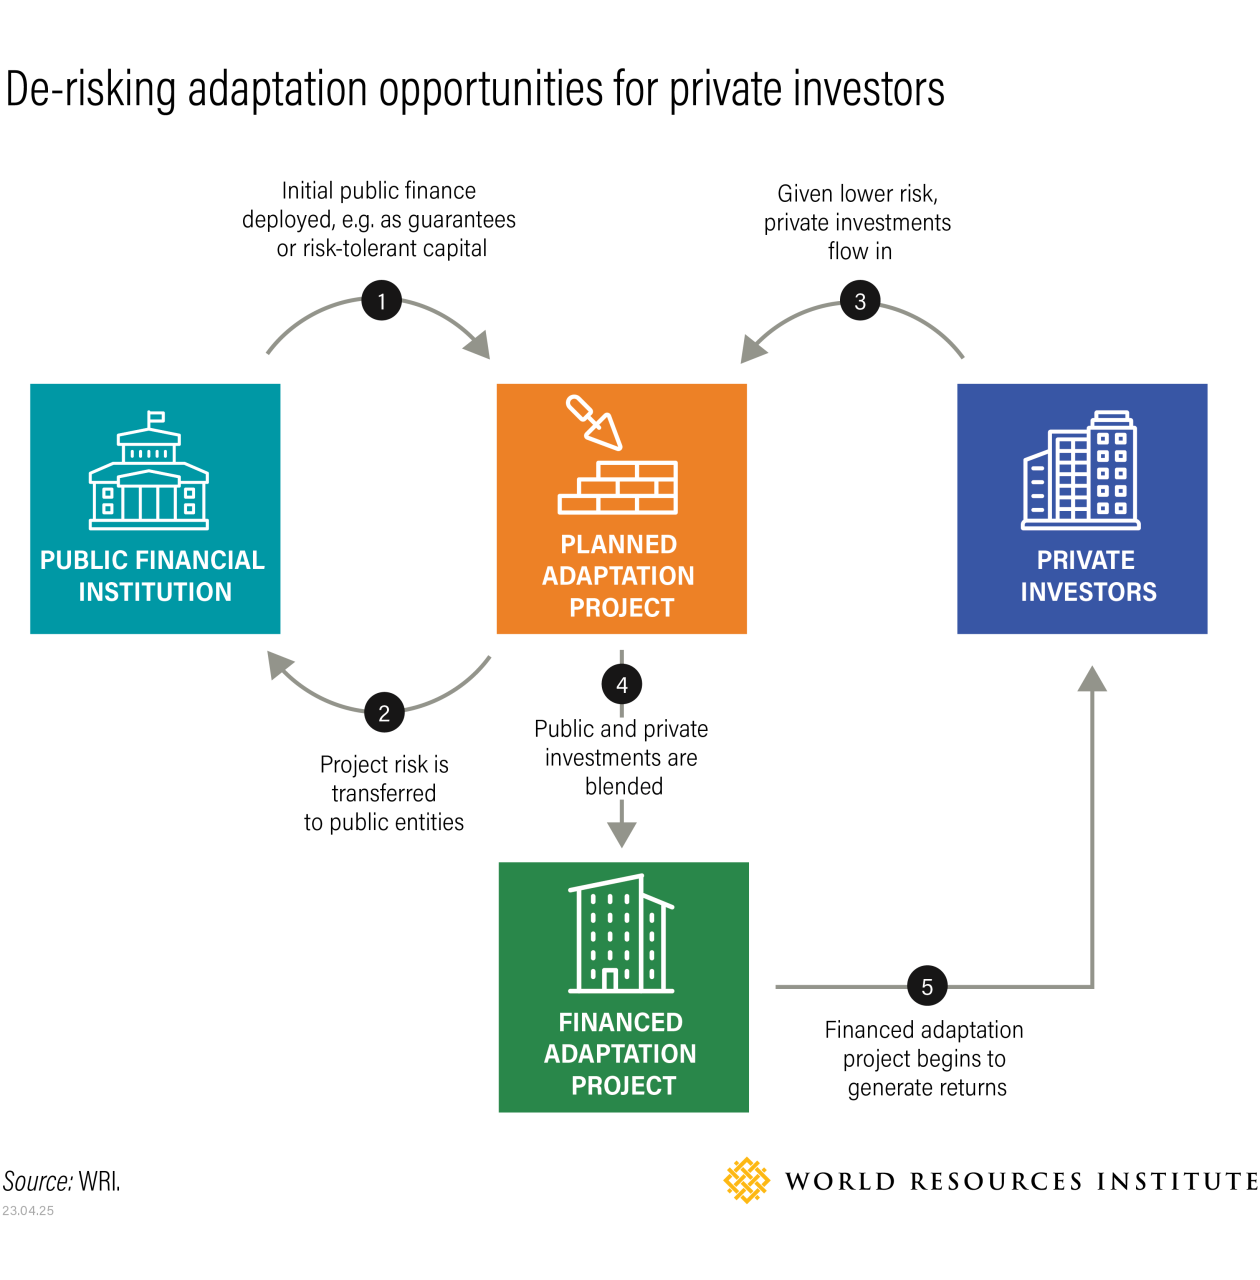 De-risking climate adaptation opportunities for private investors